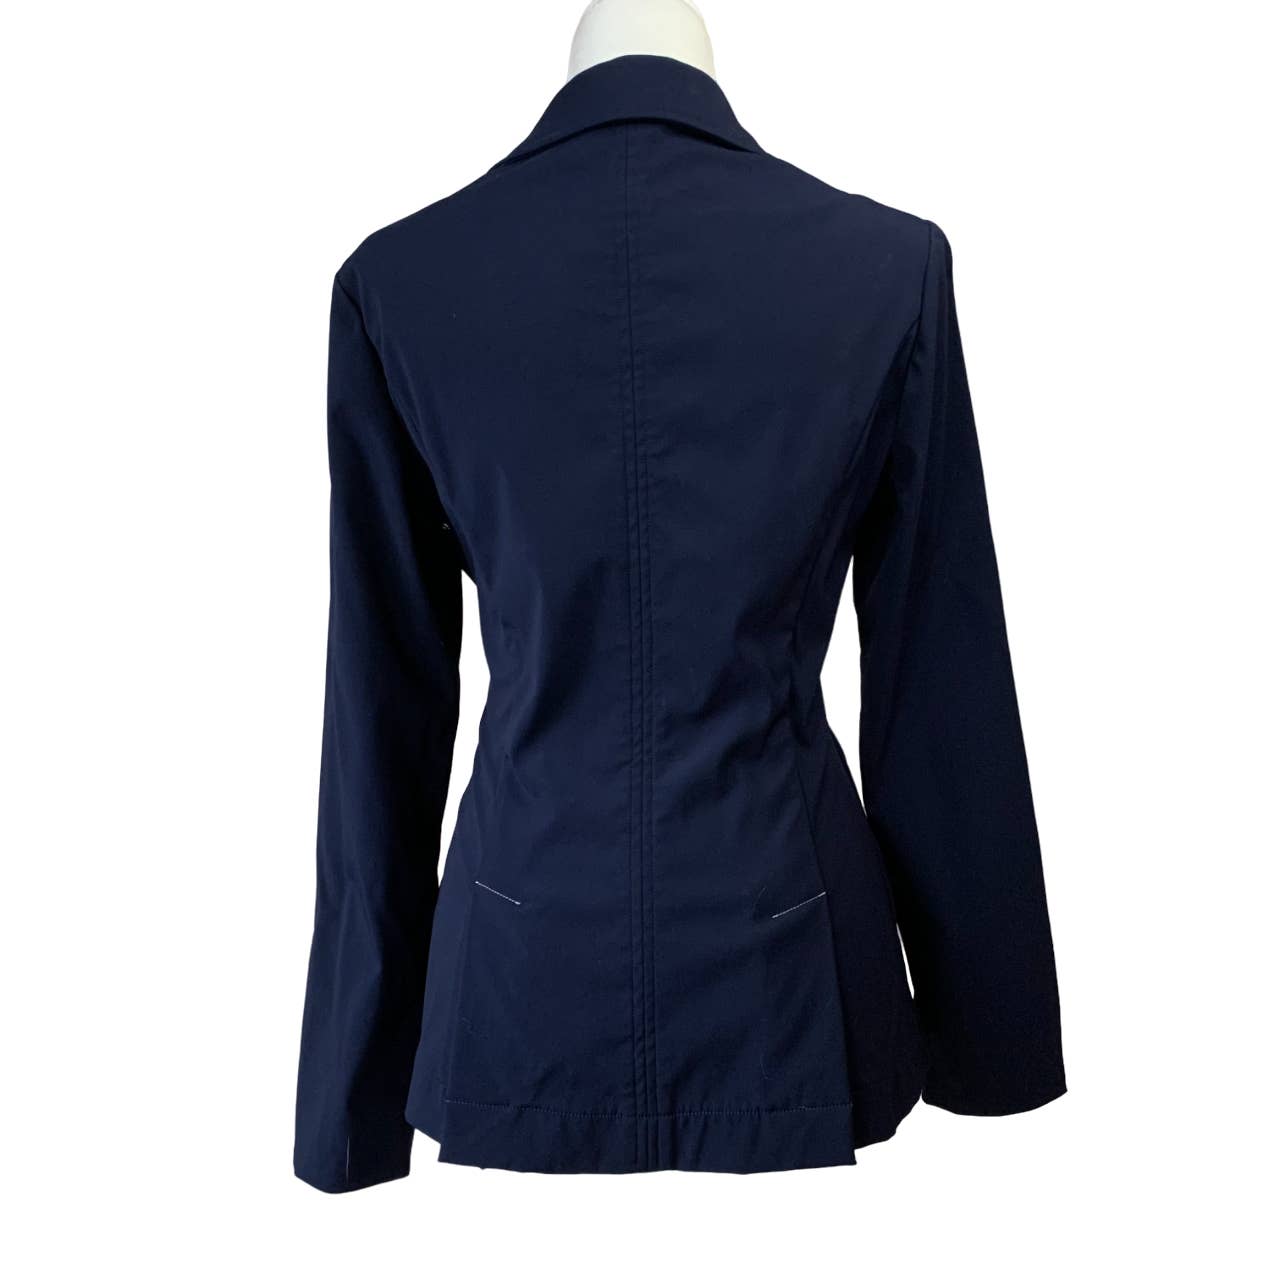 AA 'EasyCare' Competition Jacket in Navy - Woman's XL